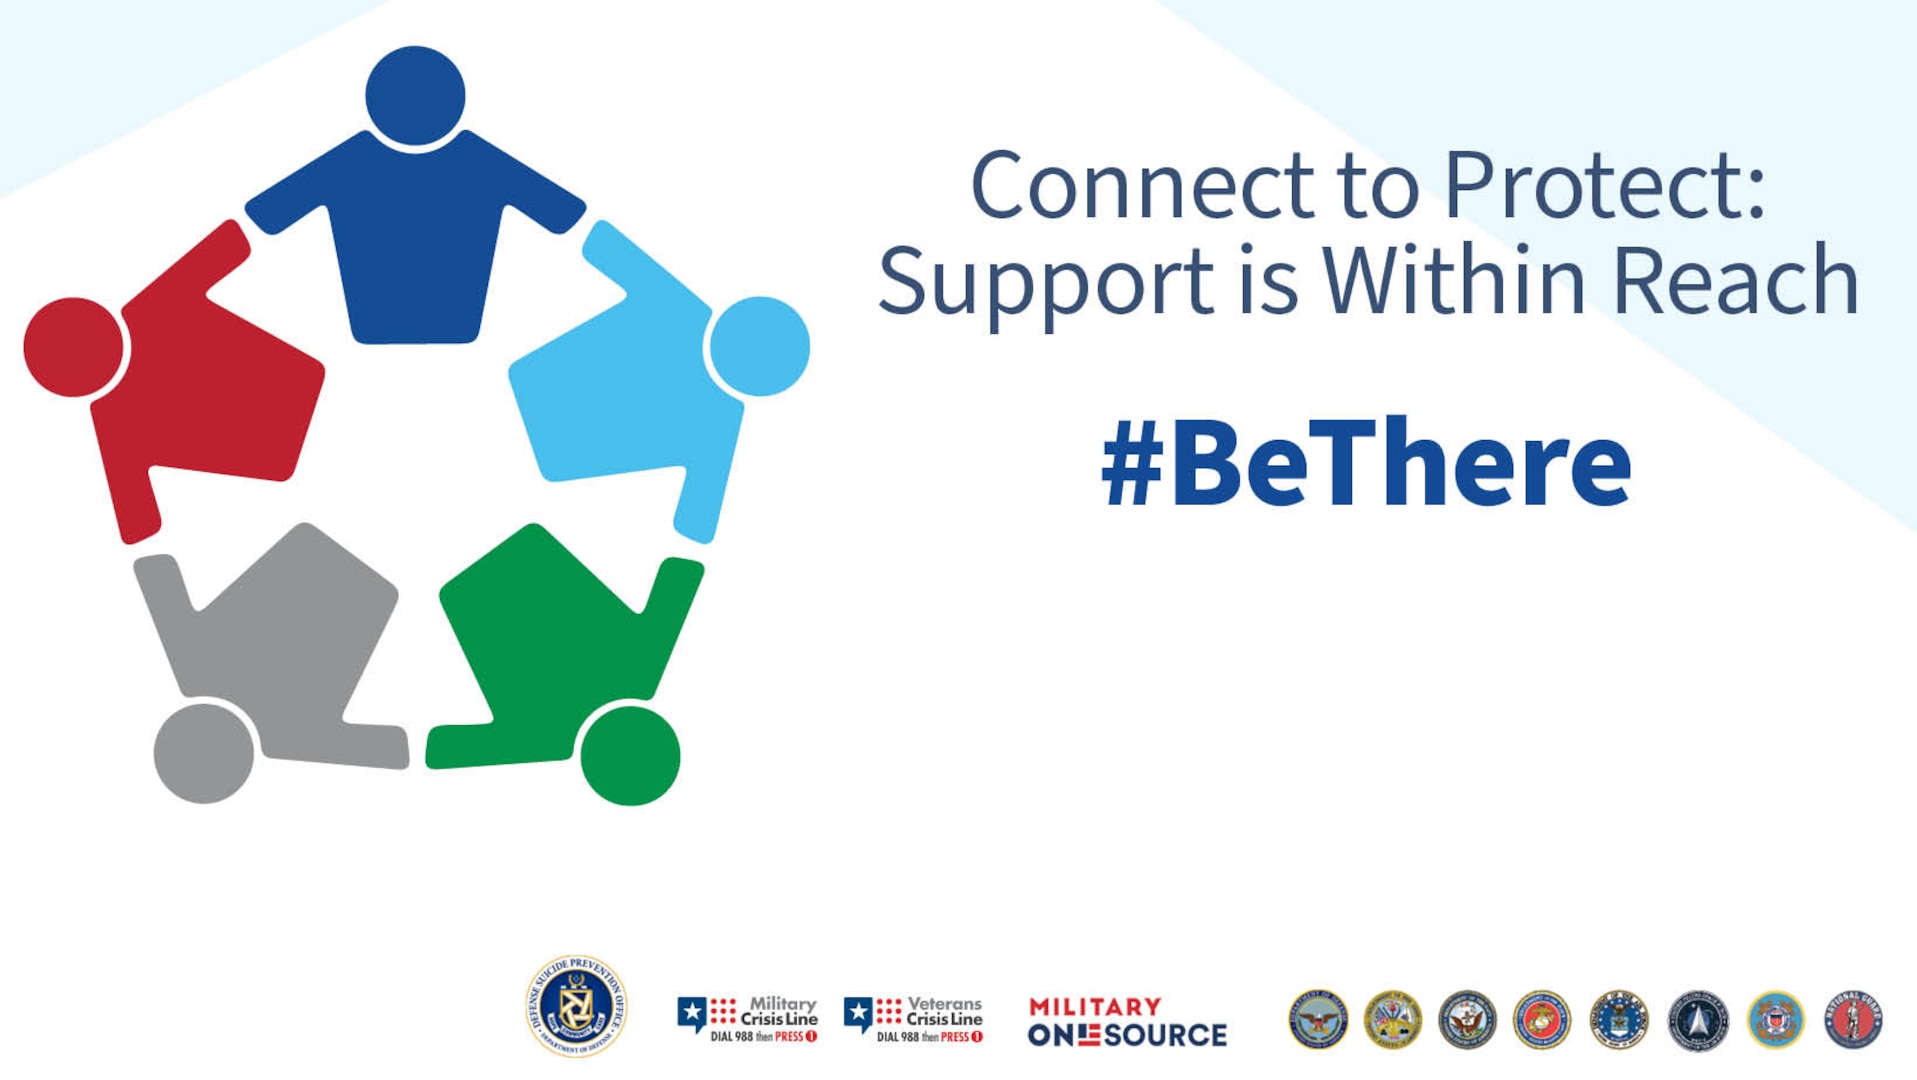 Banner with red, blue, light blue, green, and grey person illustration holding hands that reads Connect to Protect: Support is within Reach. #BeThere